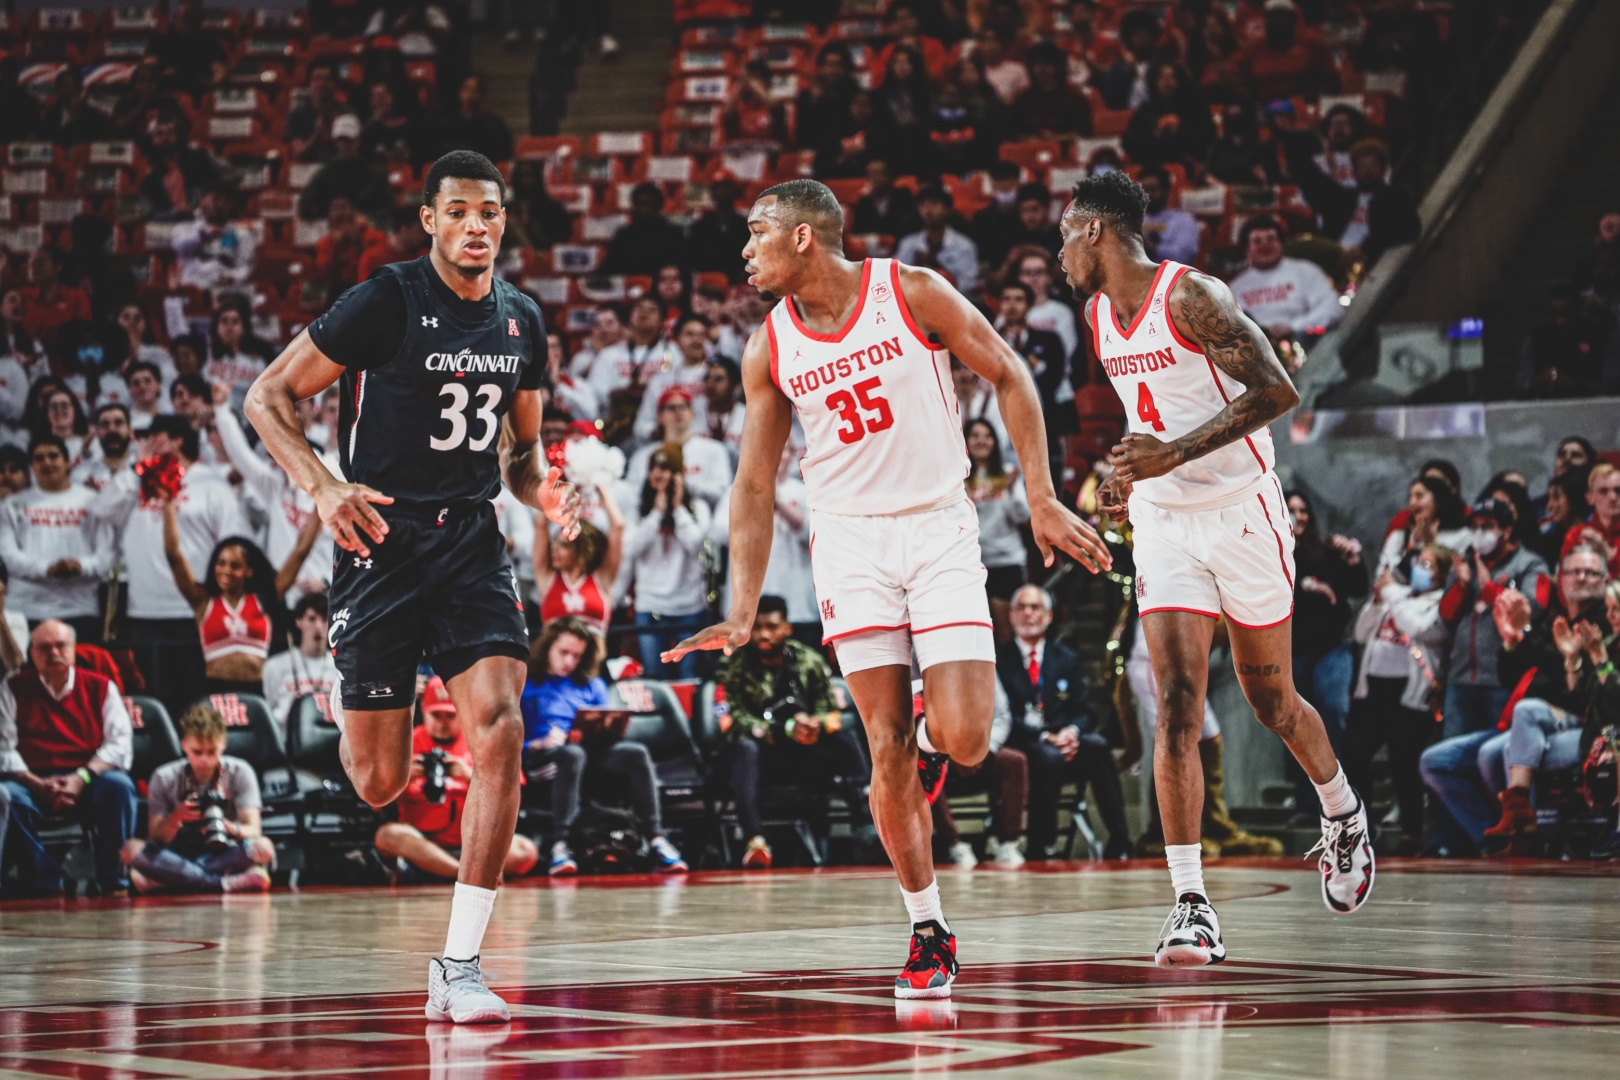 Fabian White Jr. has been the leader of the UH basketball program this season, according to Kelvin Sampson. | Victor Carroll/The Cougar